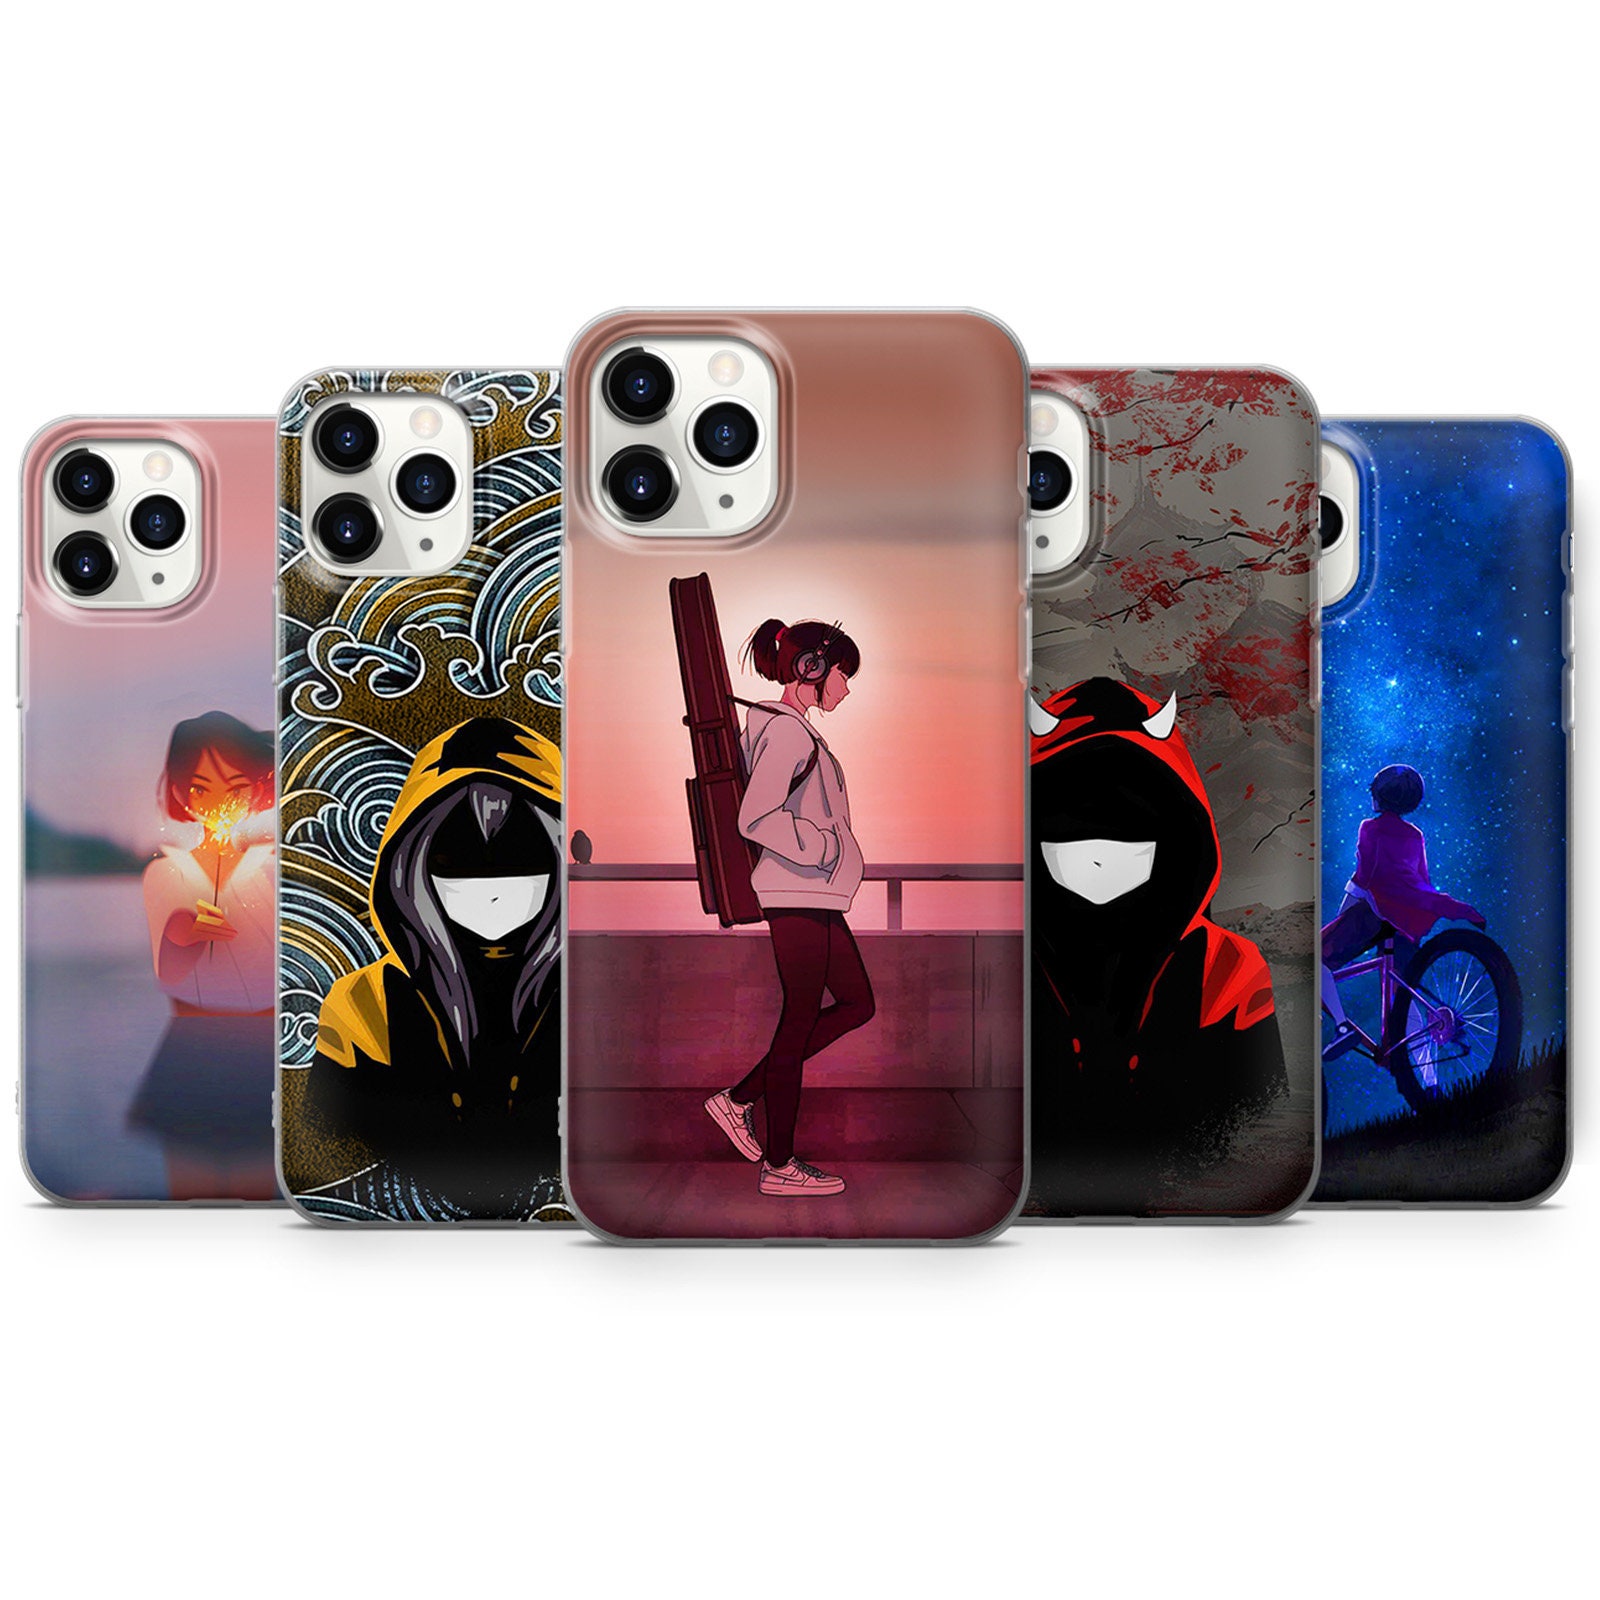 Anime Phone Cases Red Cell Phone Cases for iPhone 12 Pro Max 67 inch   Walmartcom